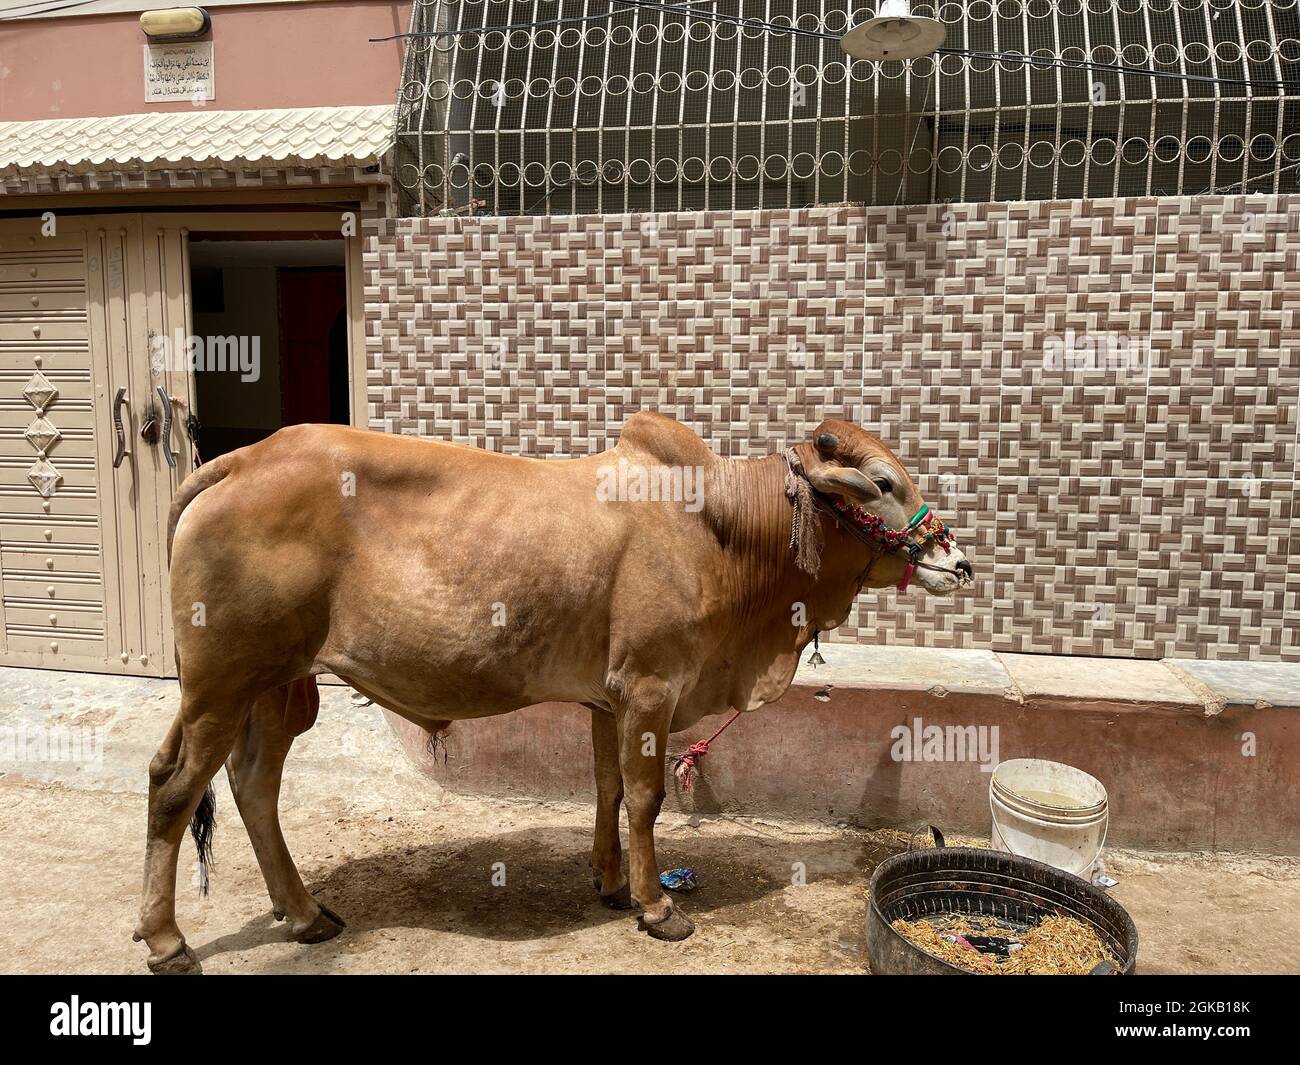 Some people are cutting a cow Sacrifice on the feast of Eid-ul-Adha Stock Photo